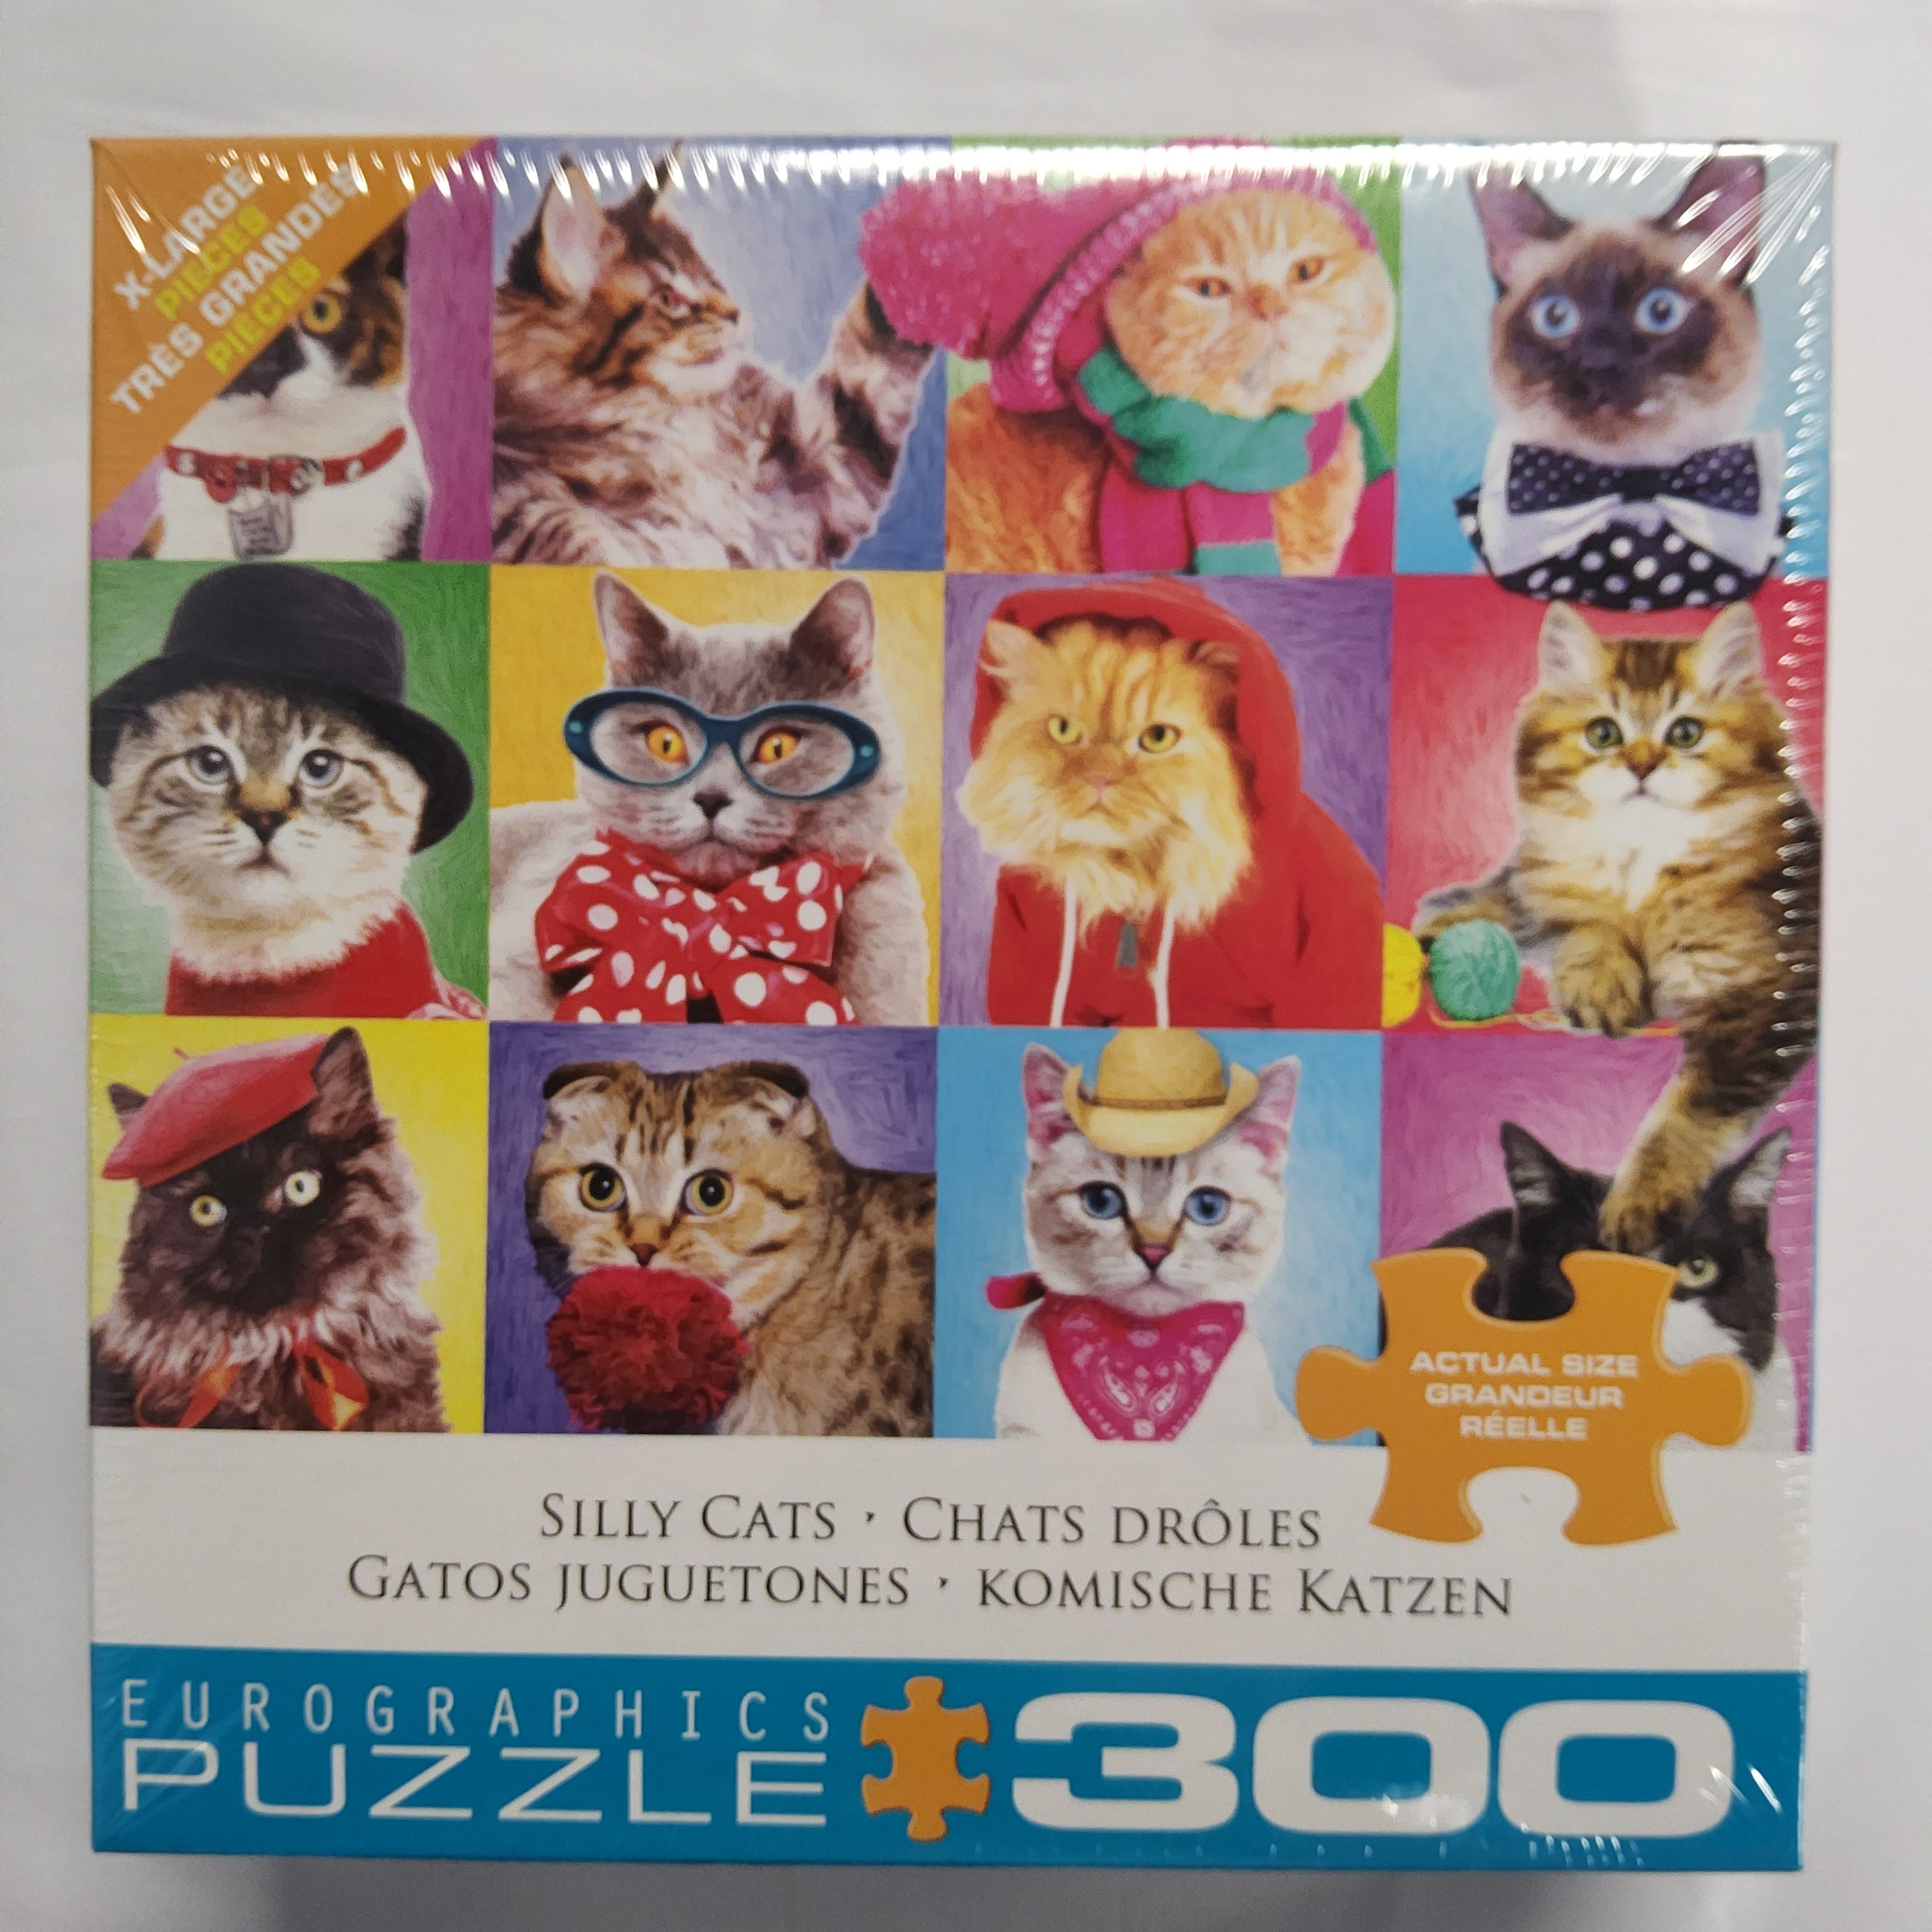 Eurographics Puzzle - Silly Cats - 300 XL pieces - 8300-5606